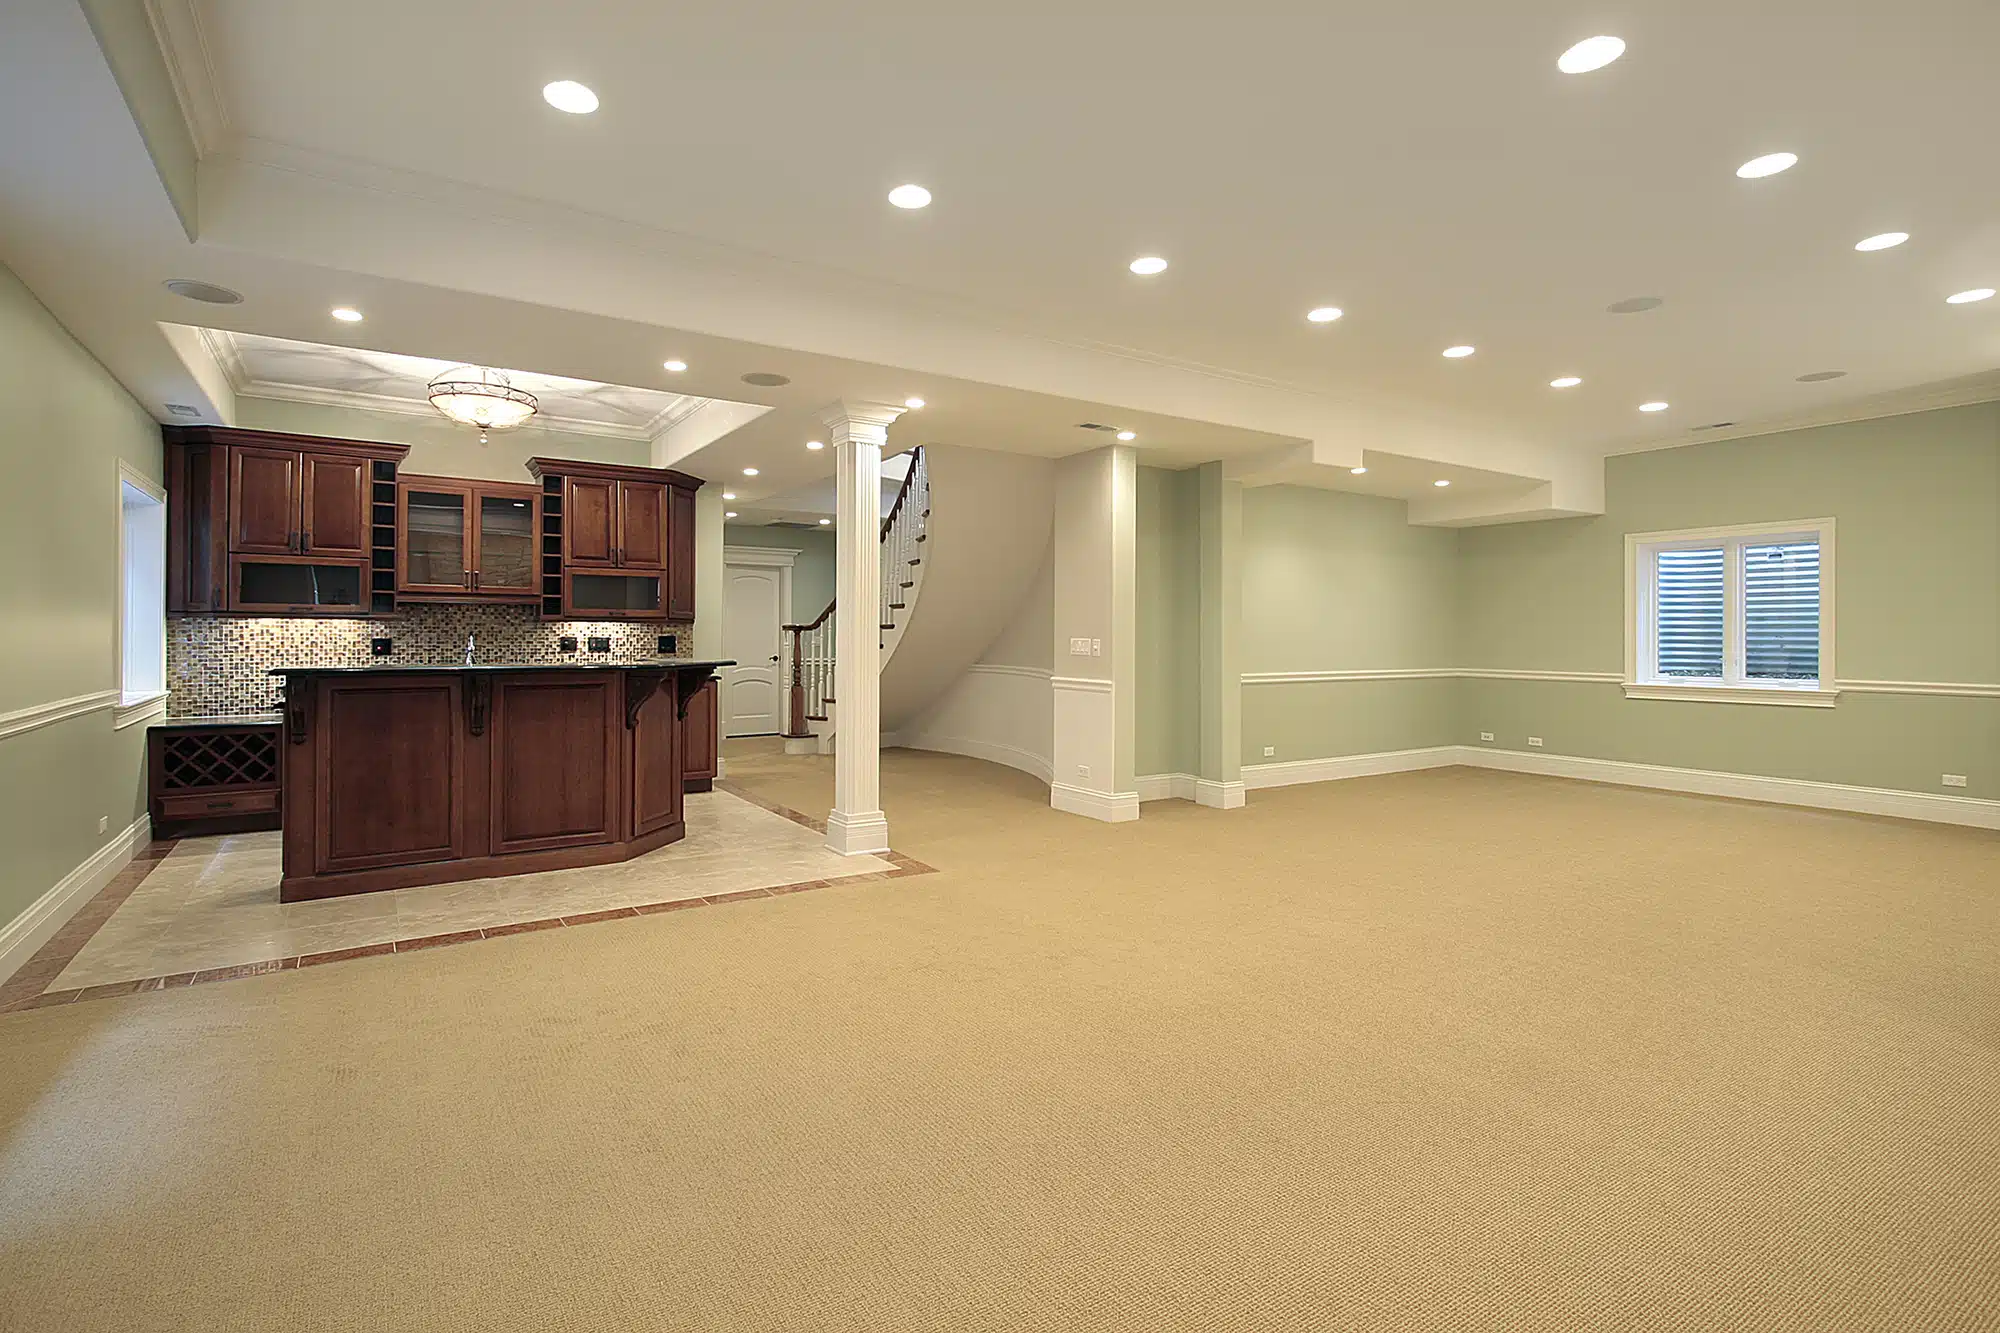 basement remodeling contractor in Raleigh nc